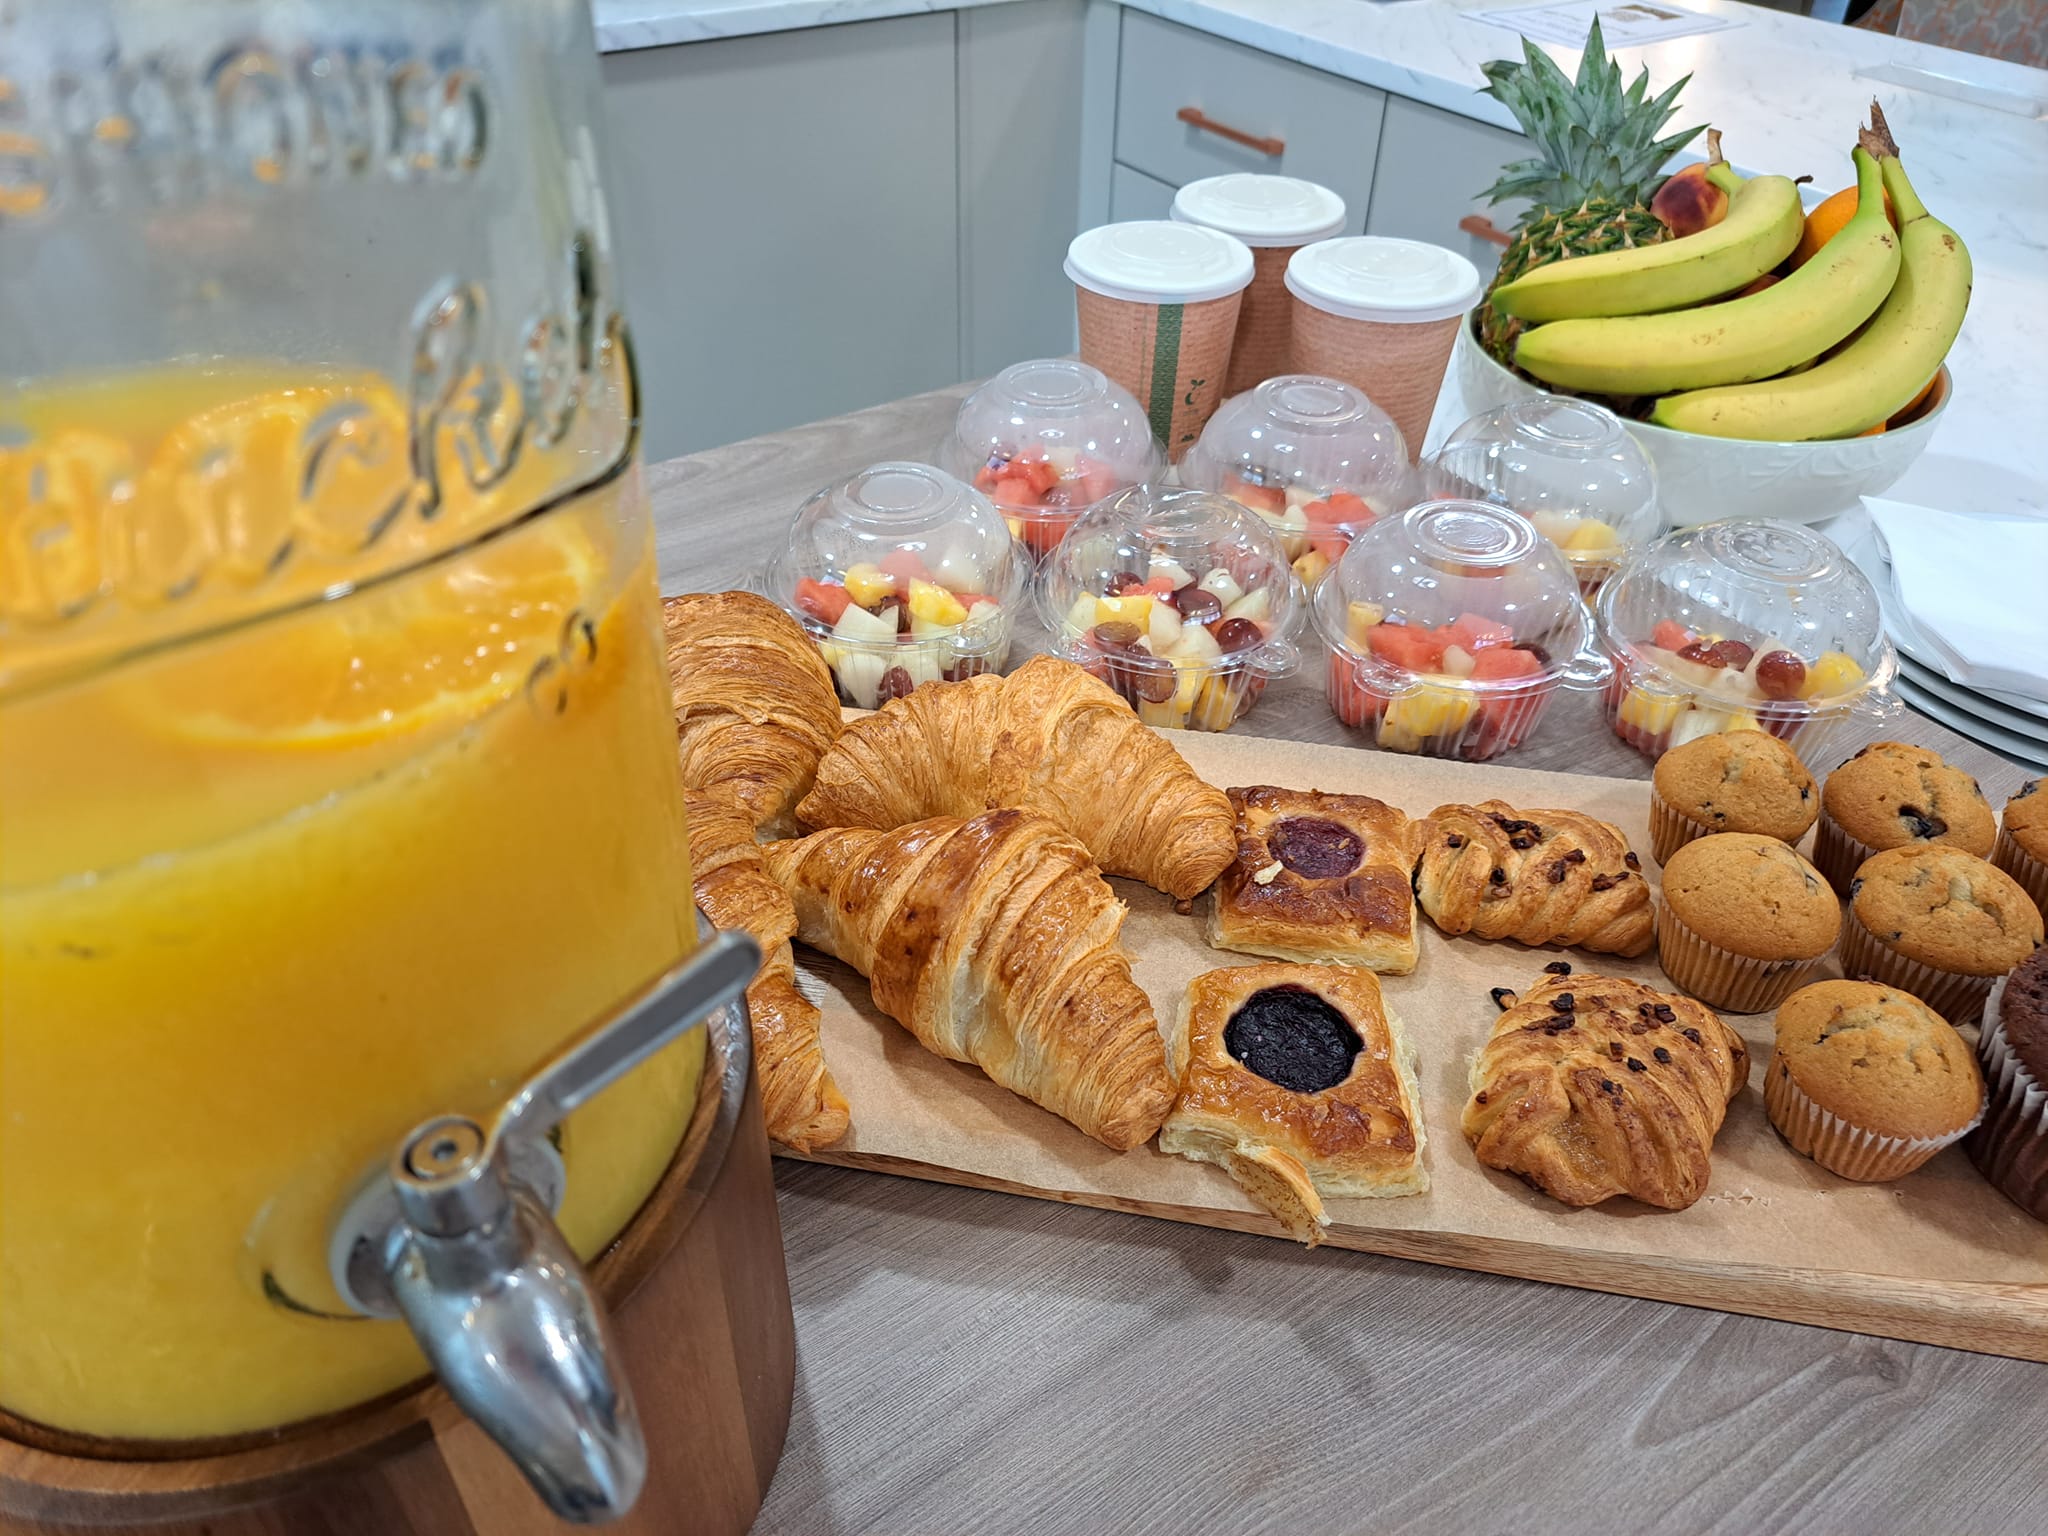 Orange juice in a large container with tap. White fruit bowl. Seven plastic fruit bowls. Three recyclable porridge containers. A selection of sweet treats including, croissant, blueberry muffins, jam tart, pain au chocolat.